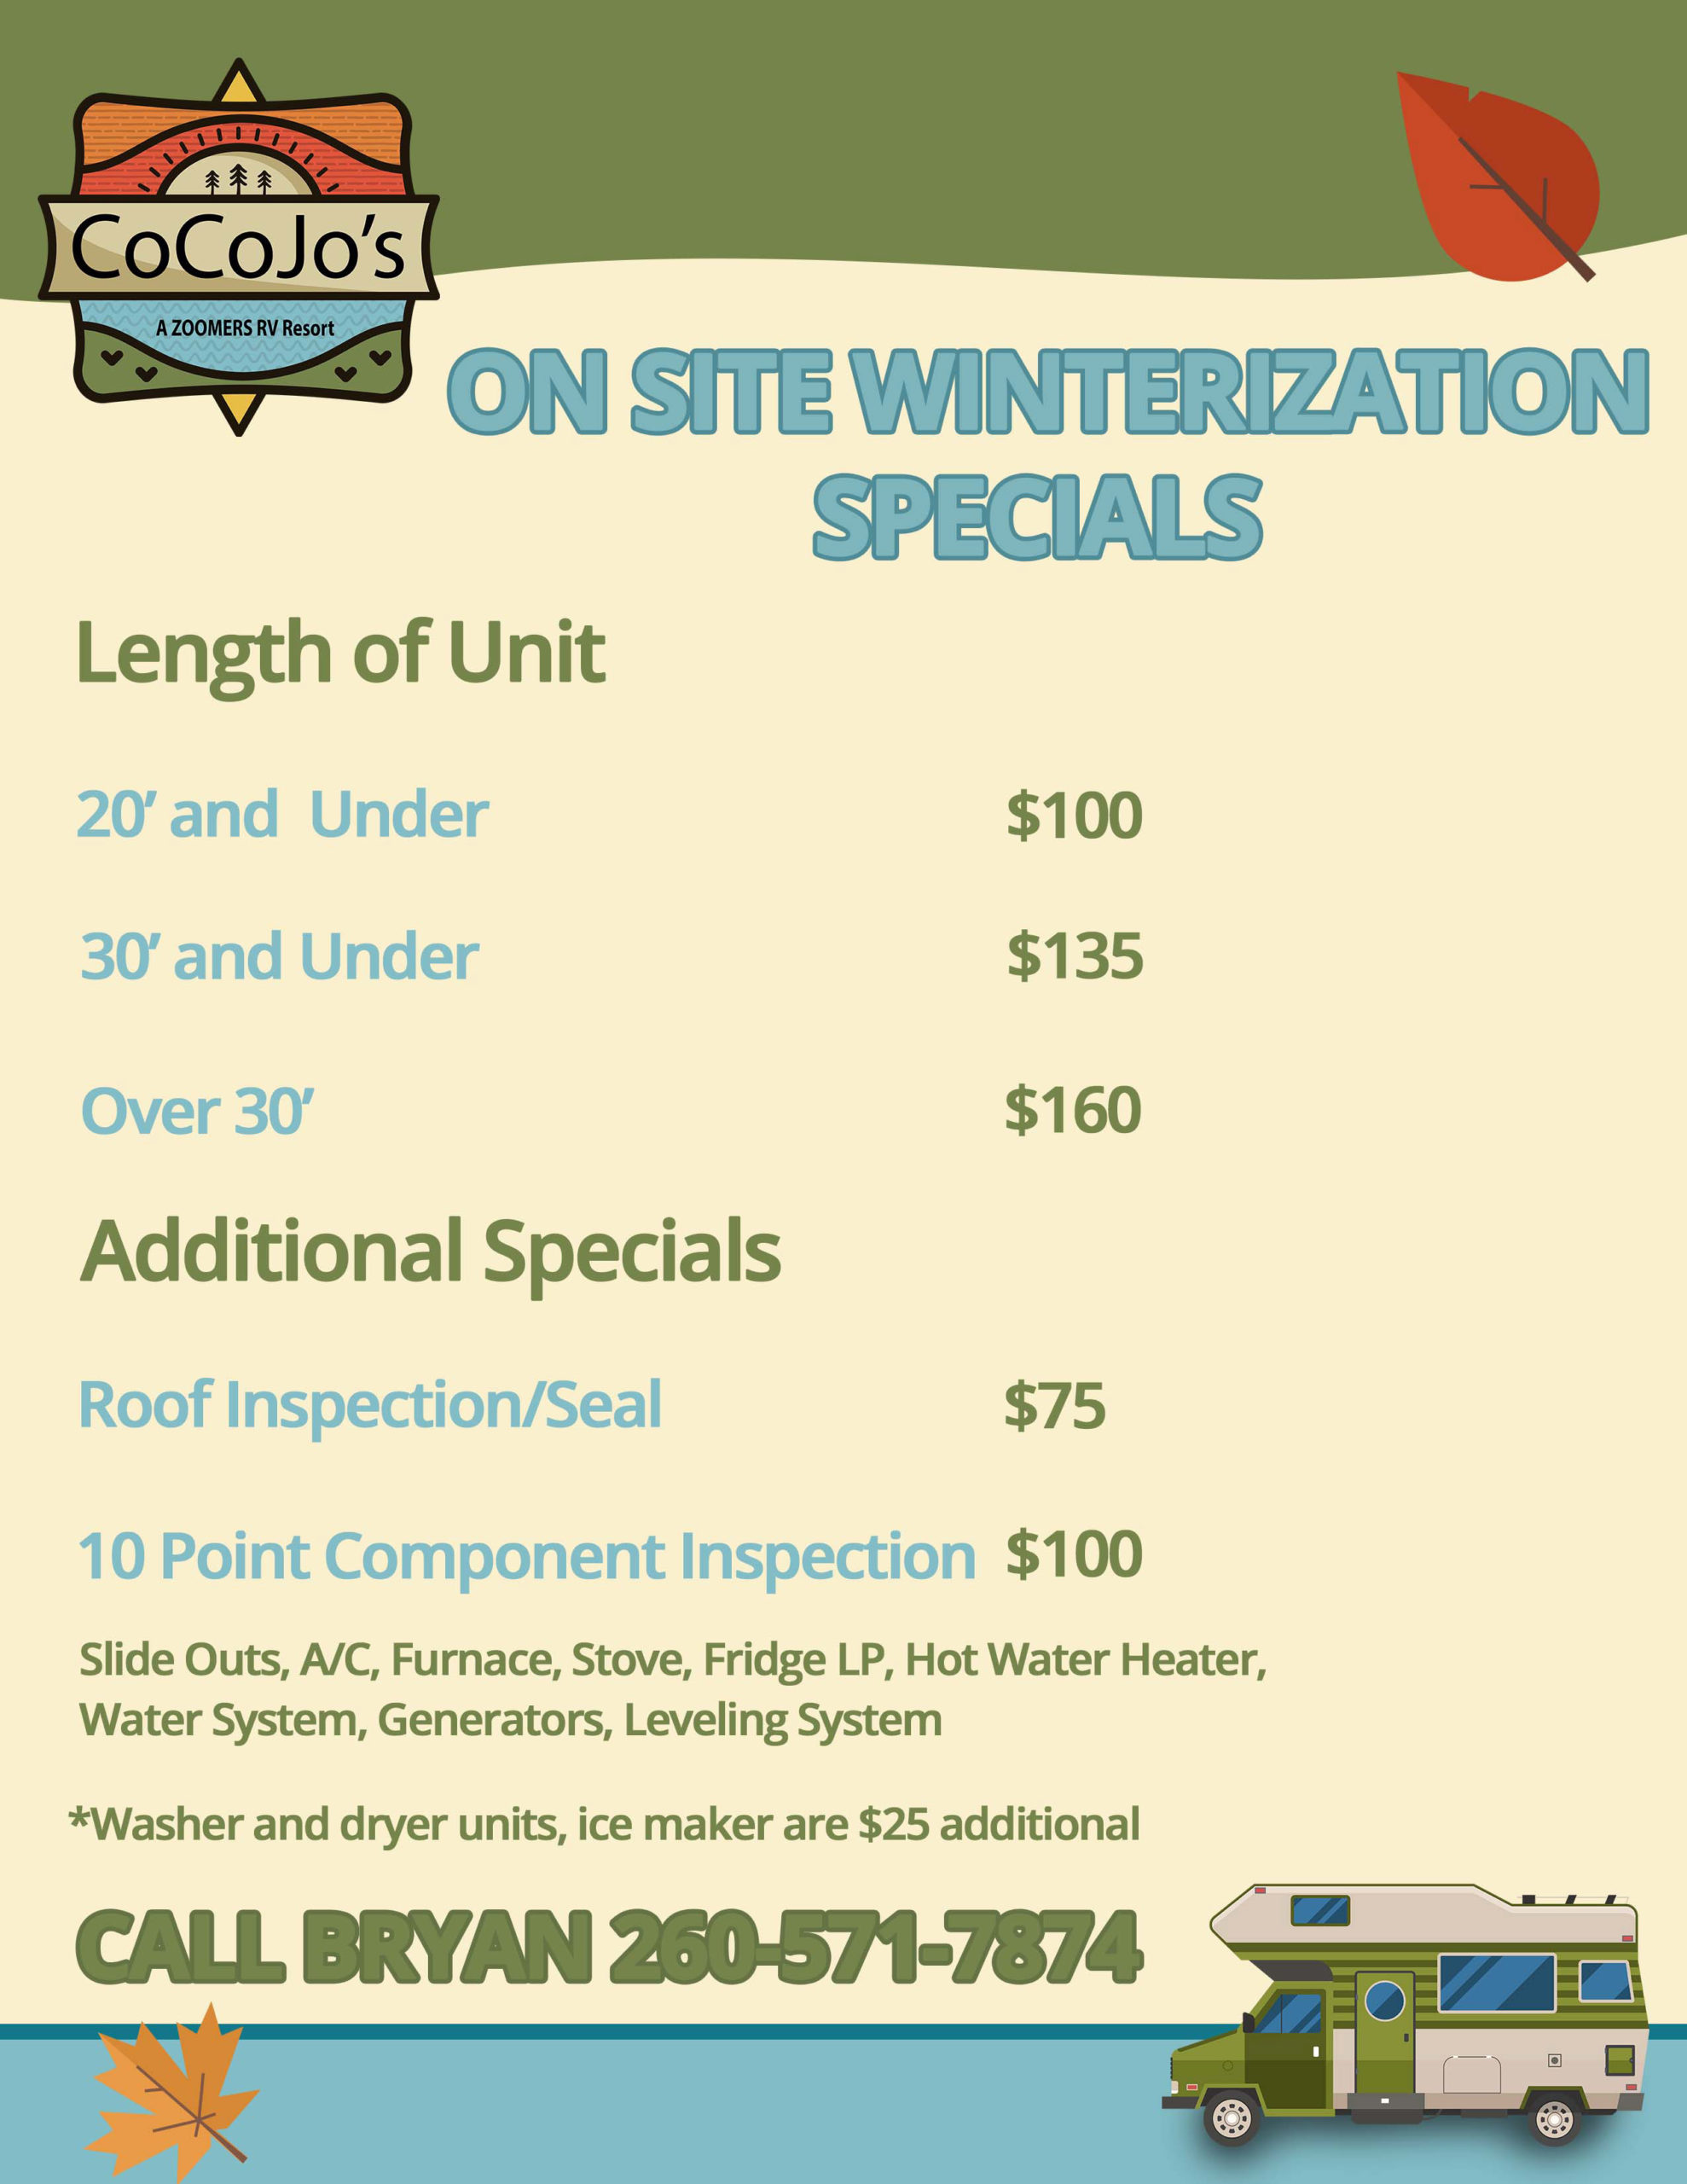 We will winterize your RV on-site here at CoCoJo's Campground! See our deals on winterization and contact us today!